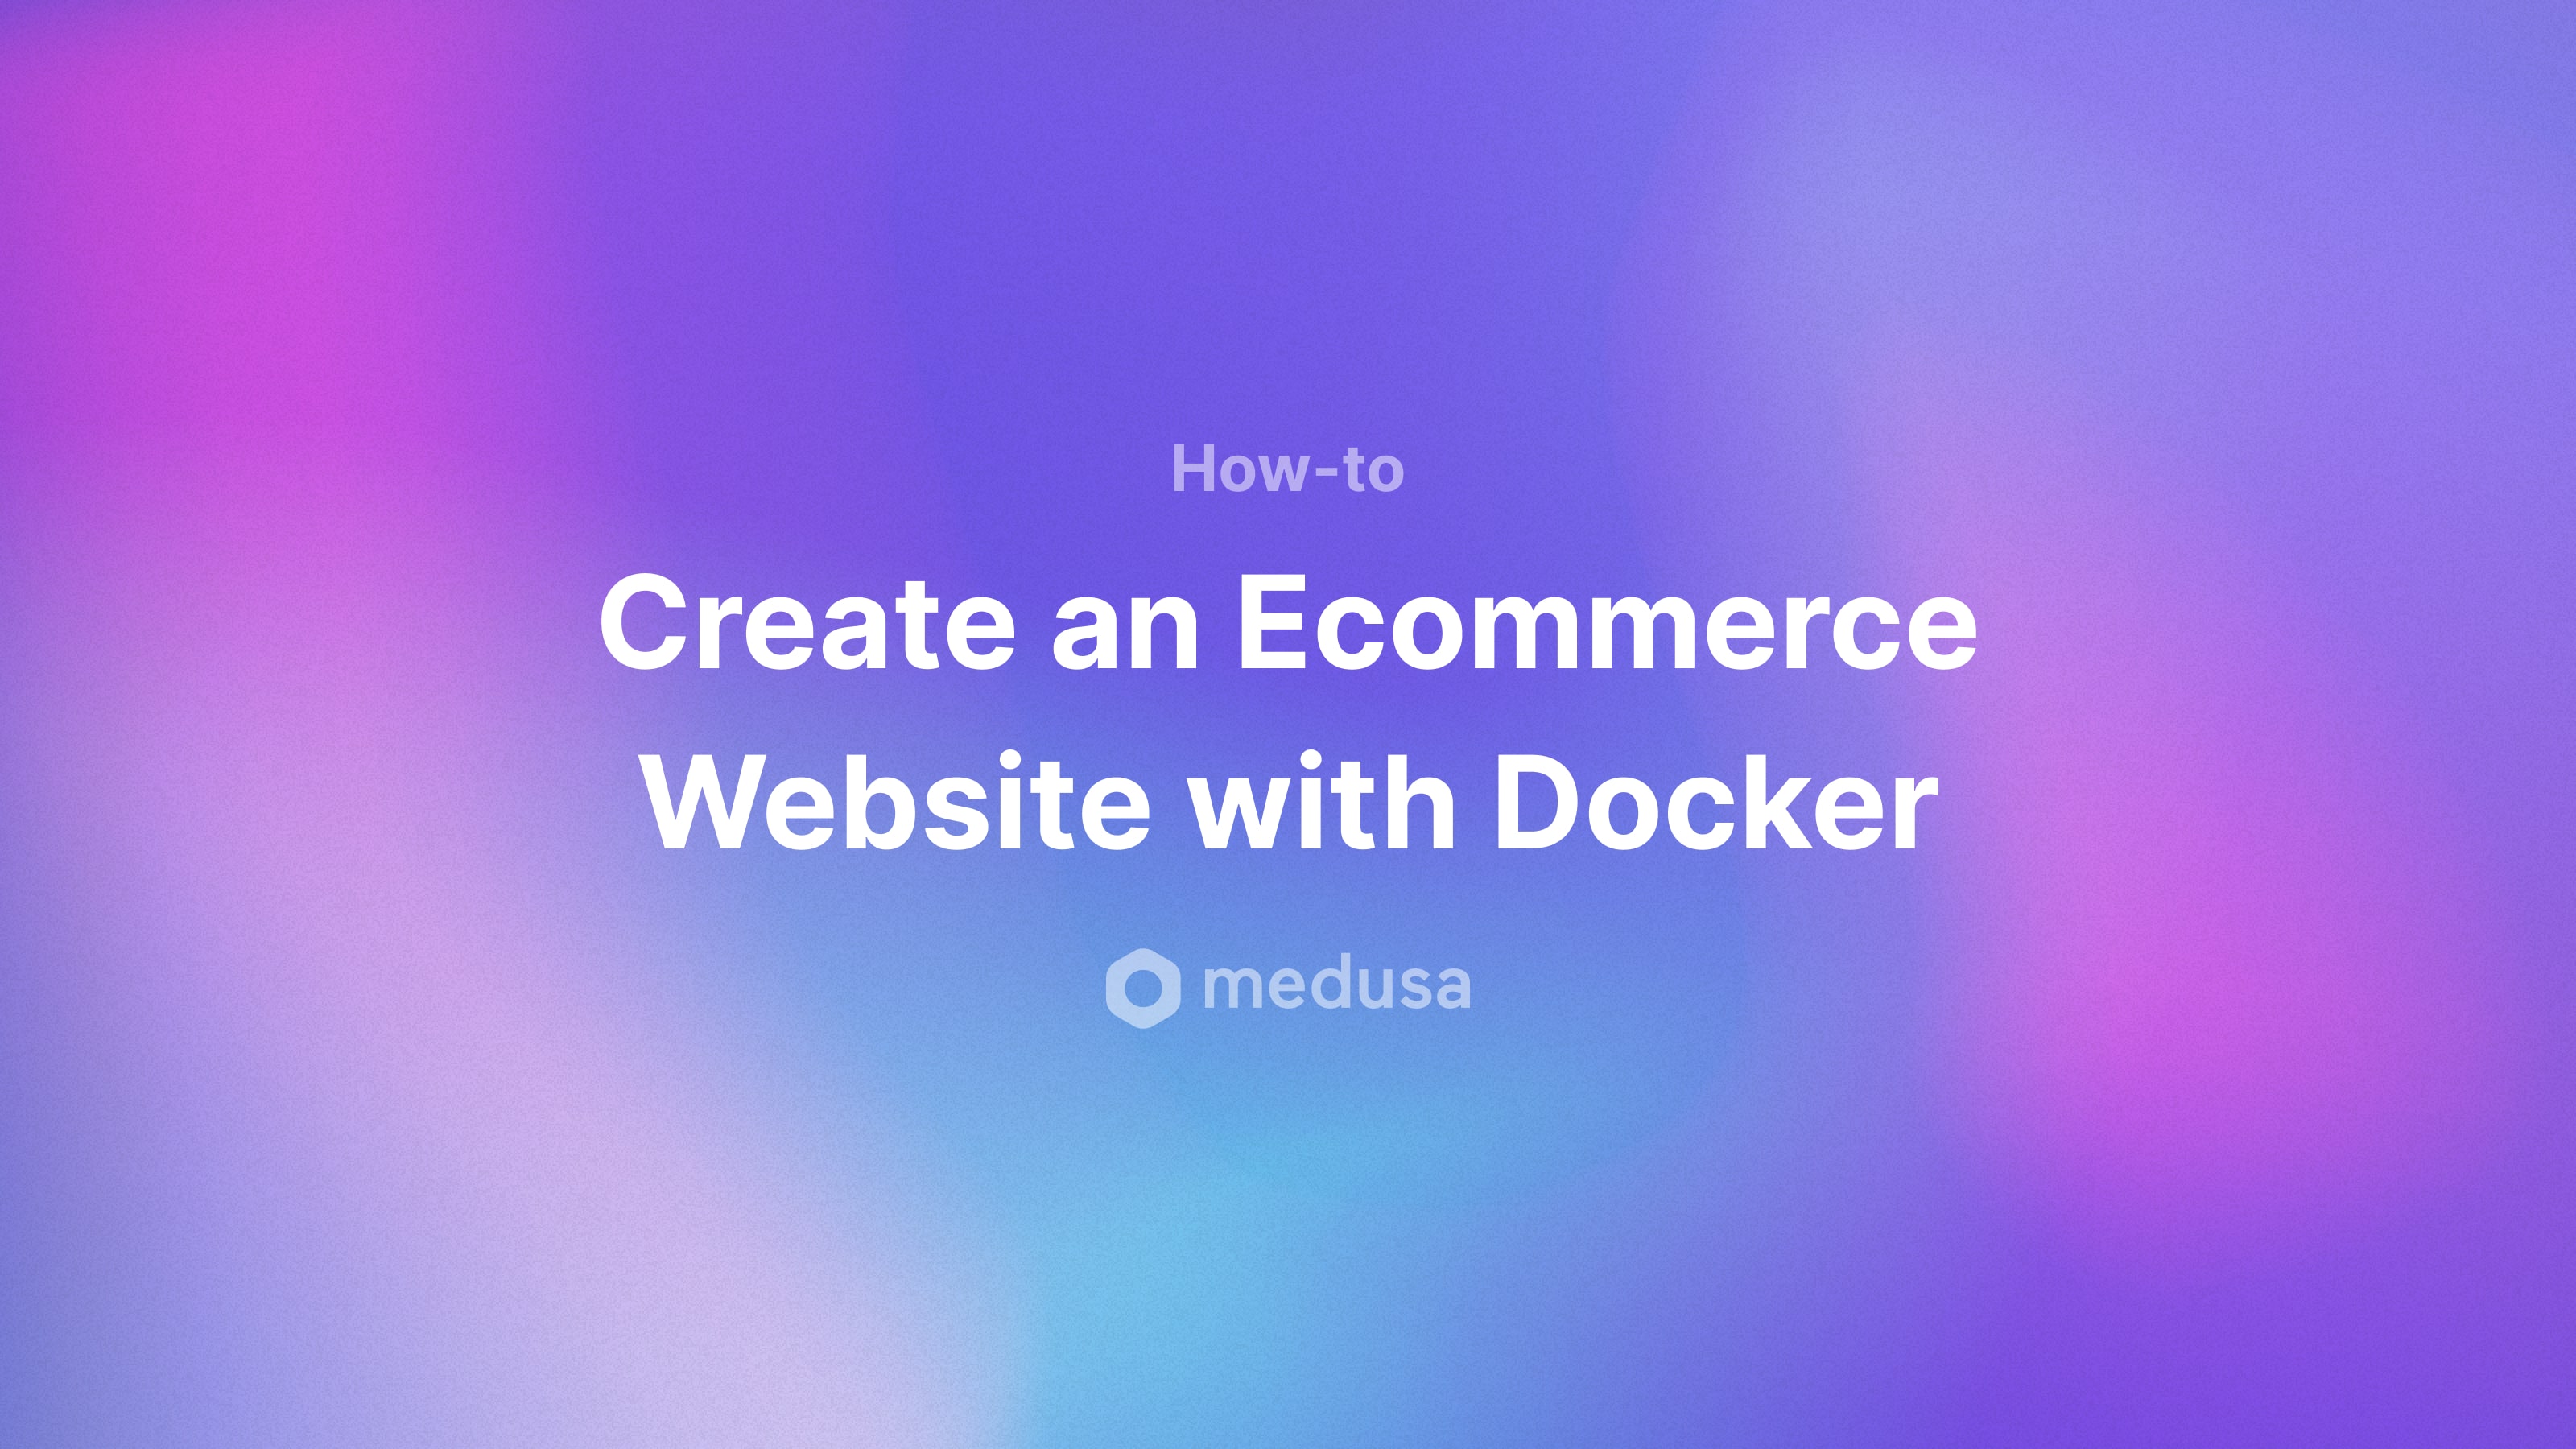 Create an Ecommerce Website with Docker